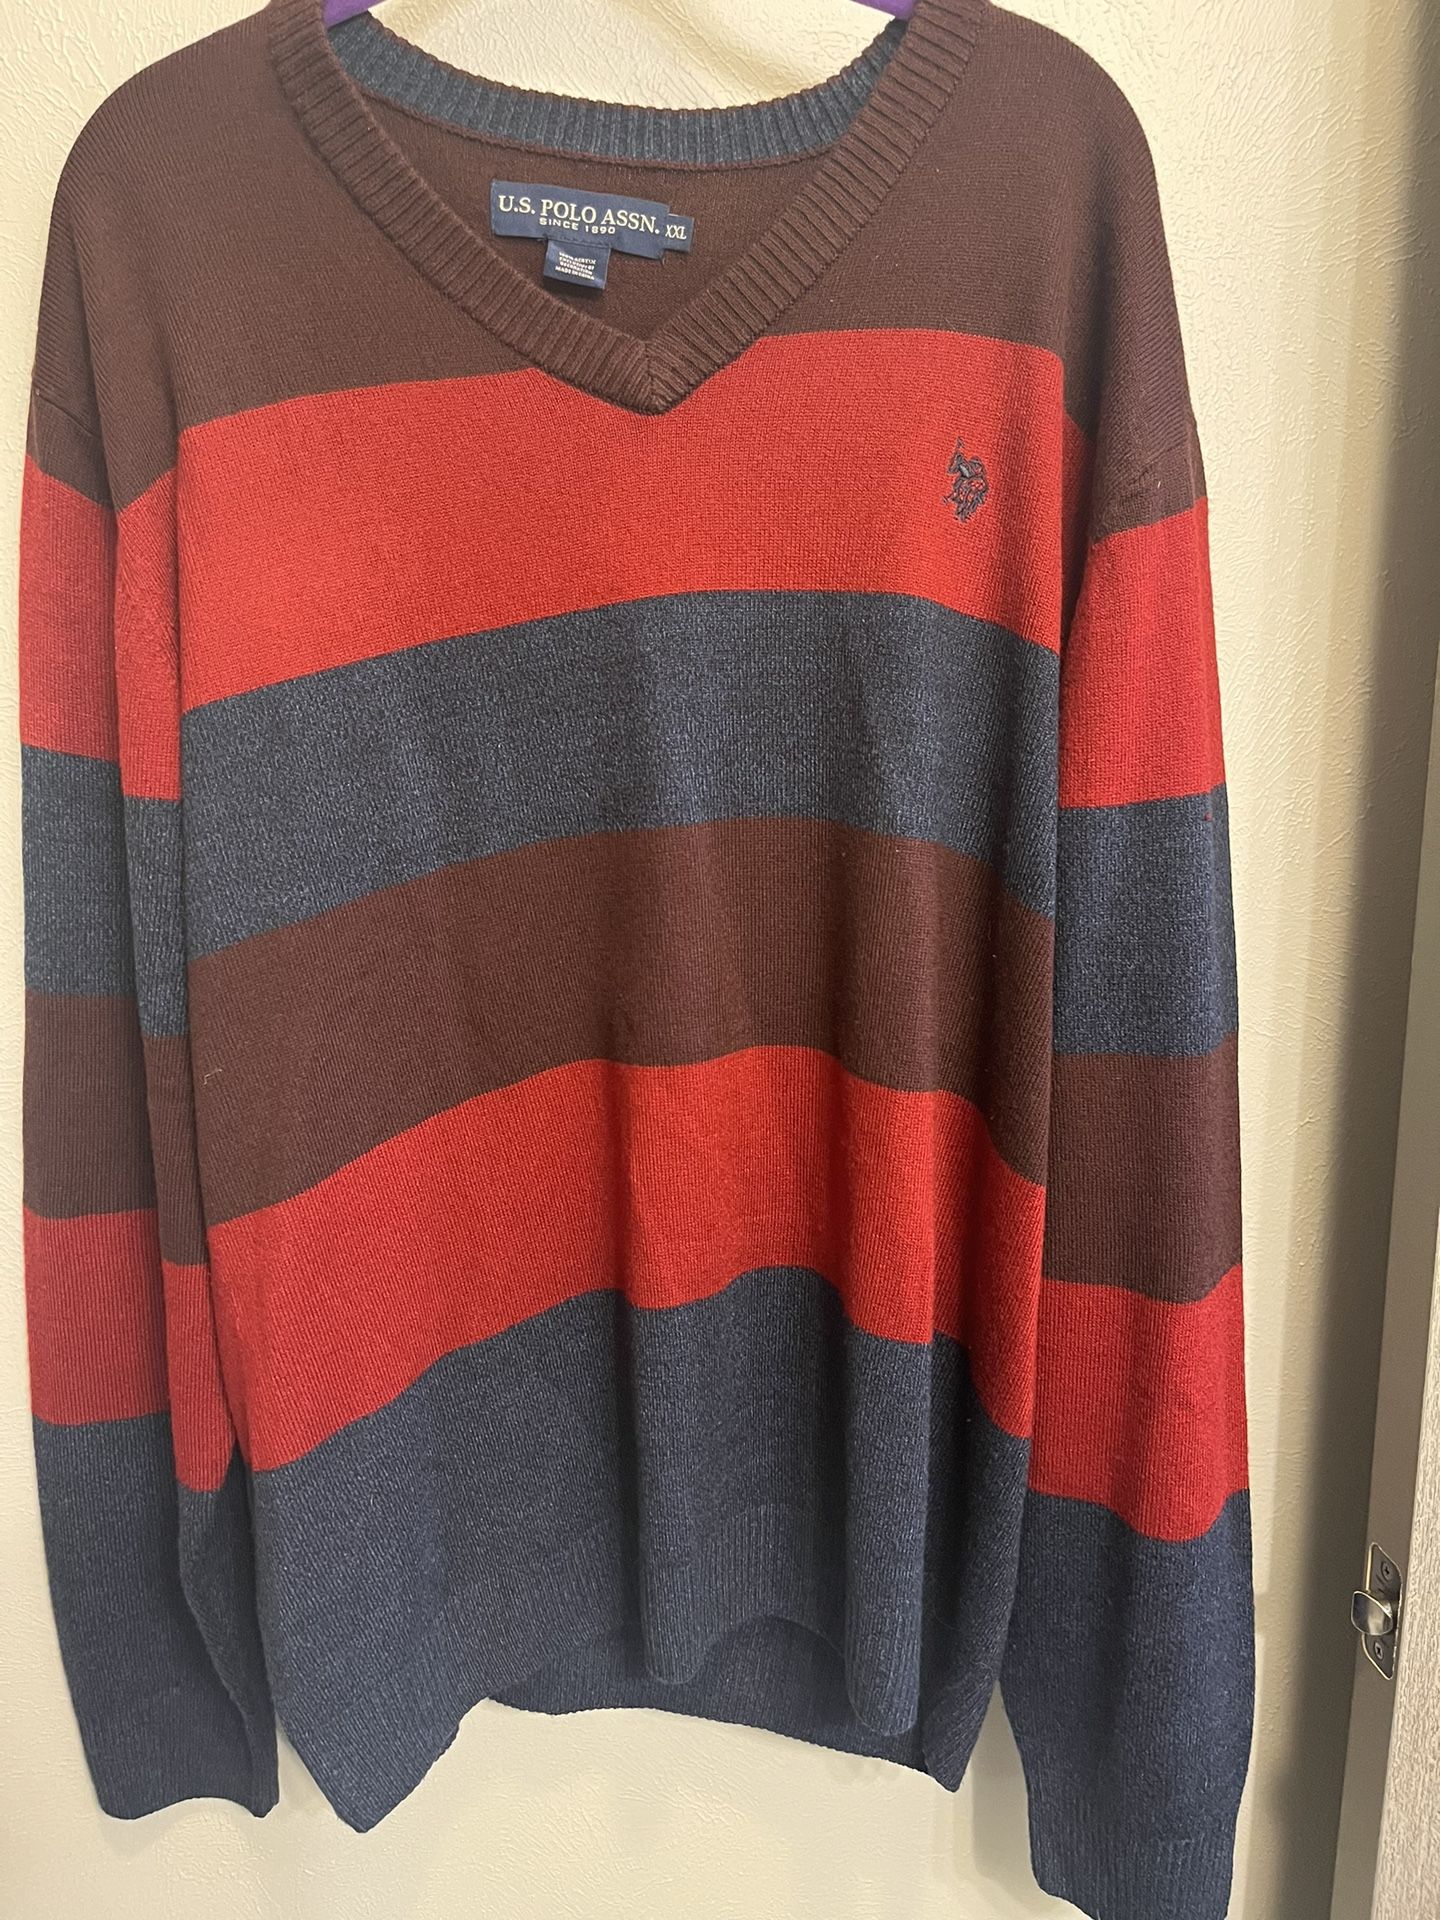 U.S. Polo Association Men’s Red And Blue Stripe Pullover Sweater